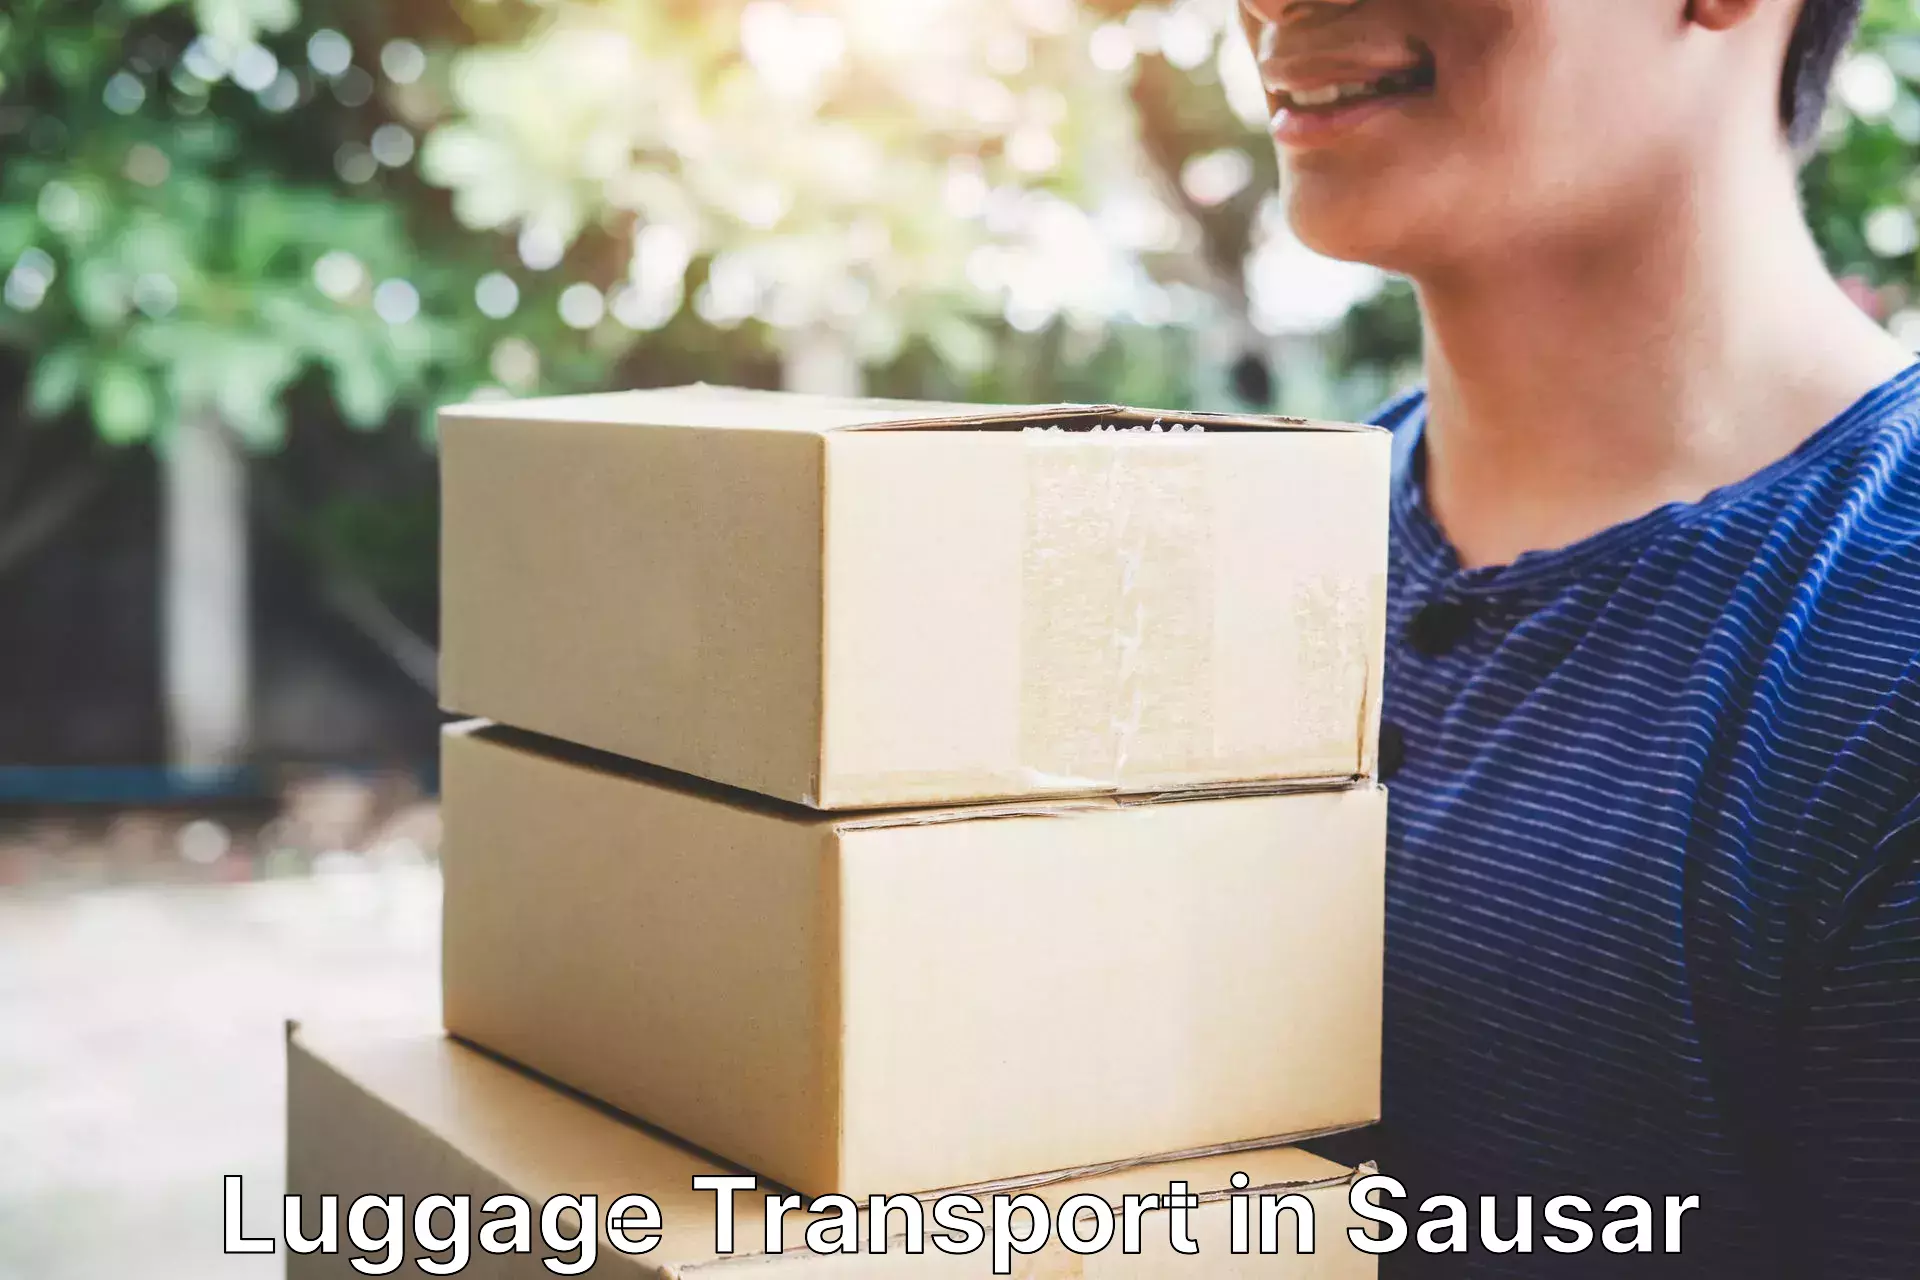 Hassle-free luggage shipping in Sausar